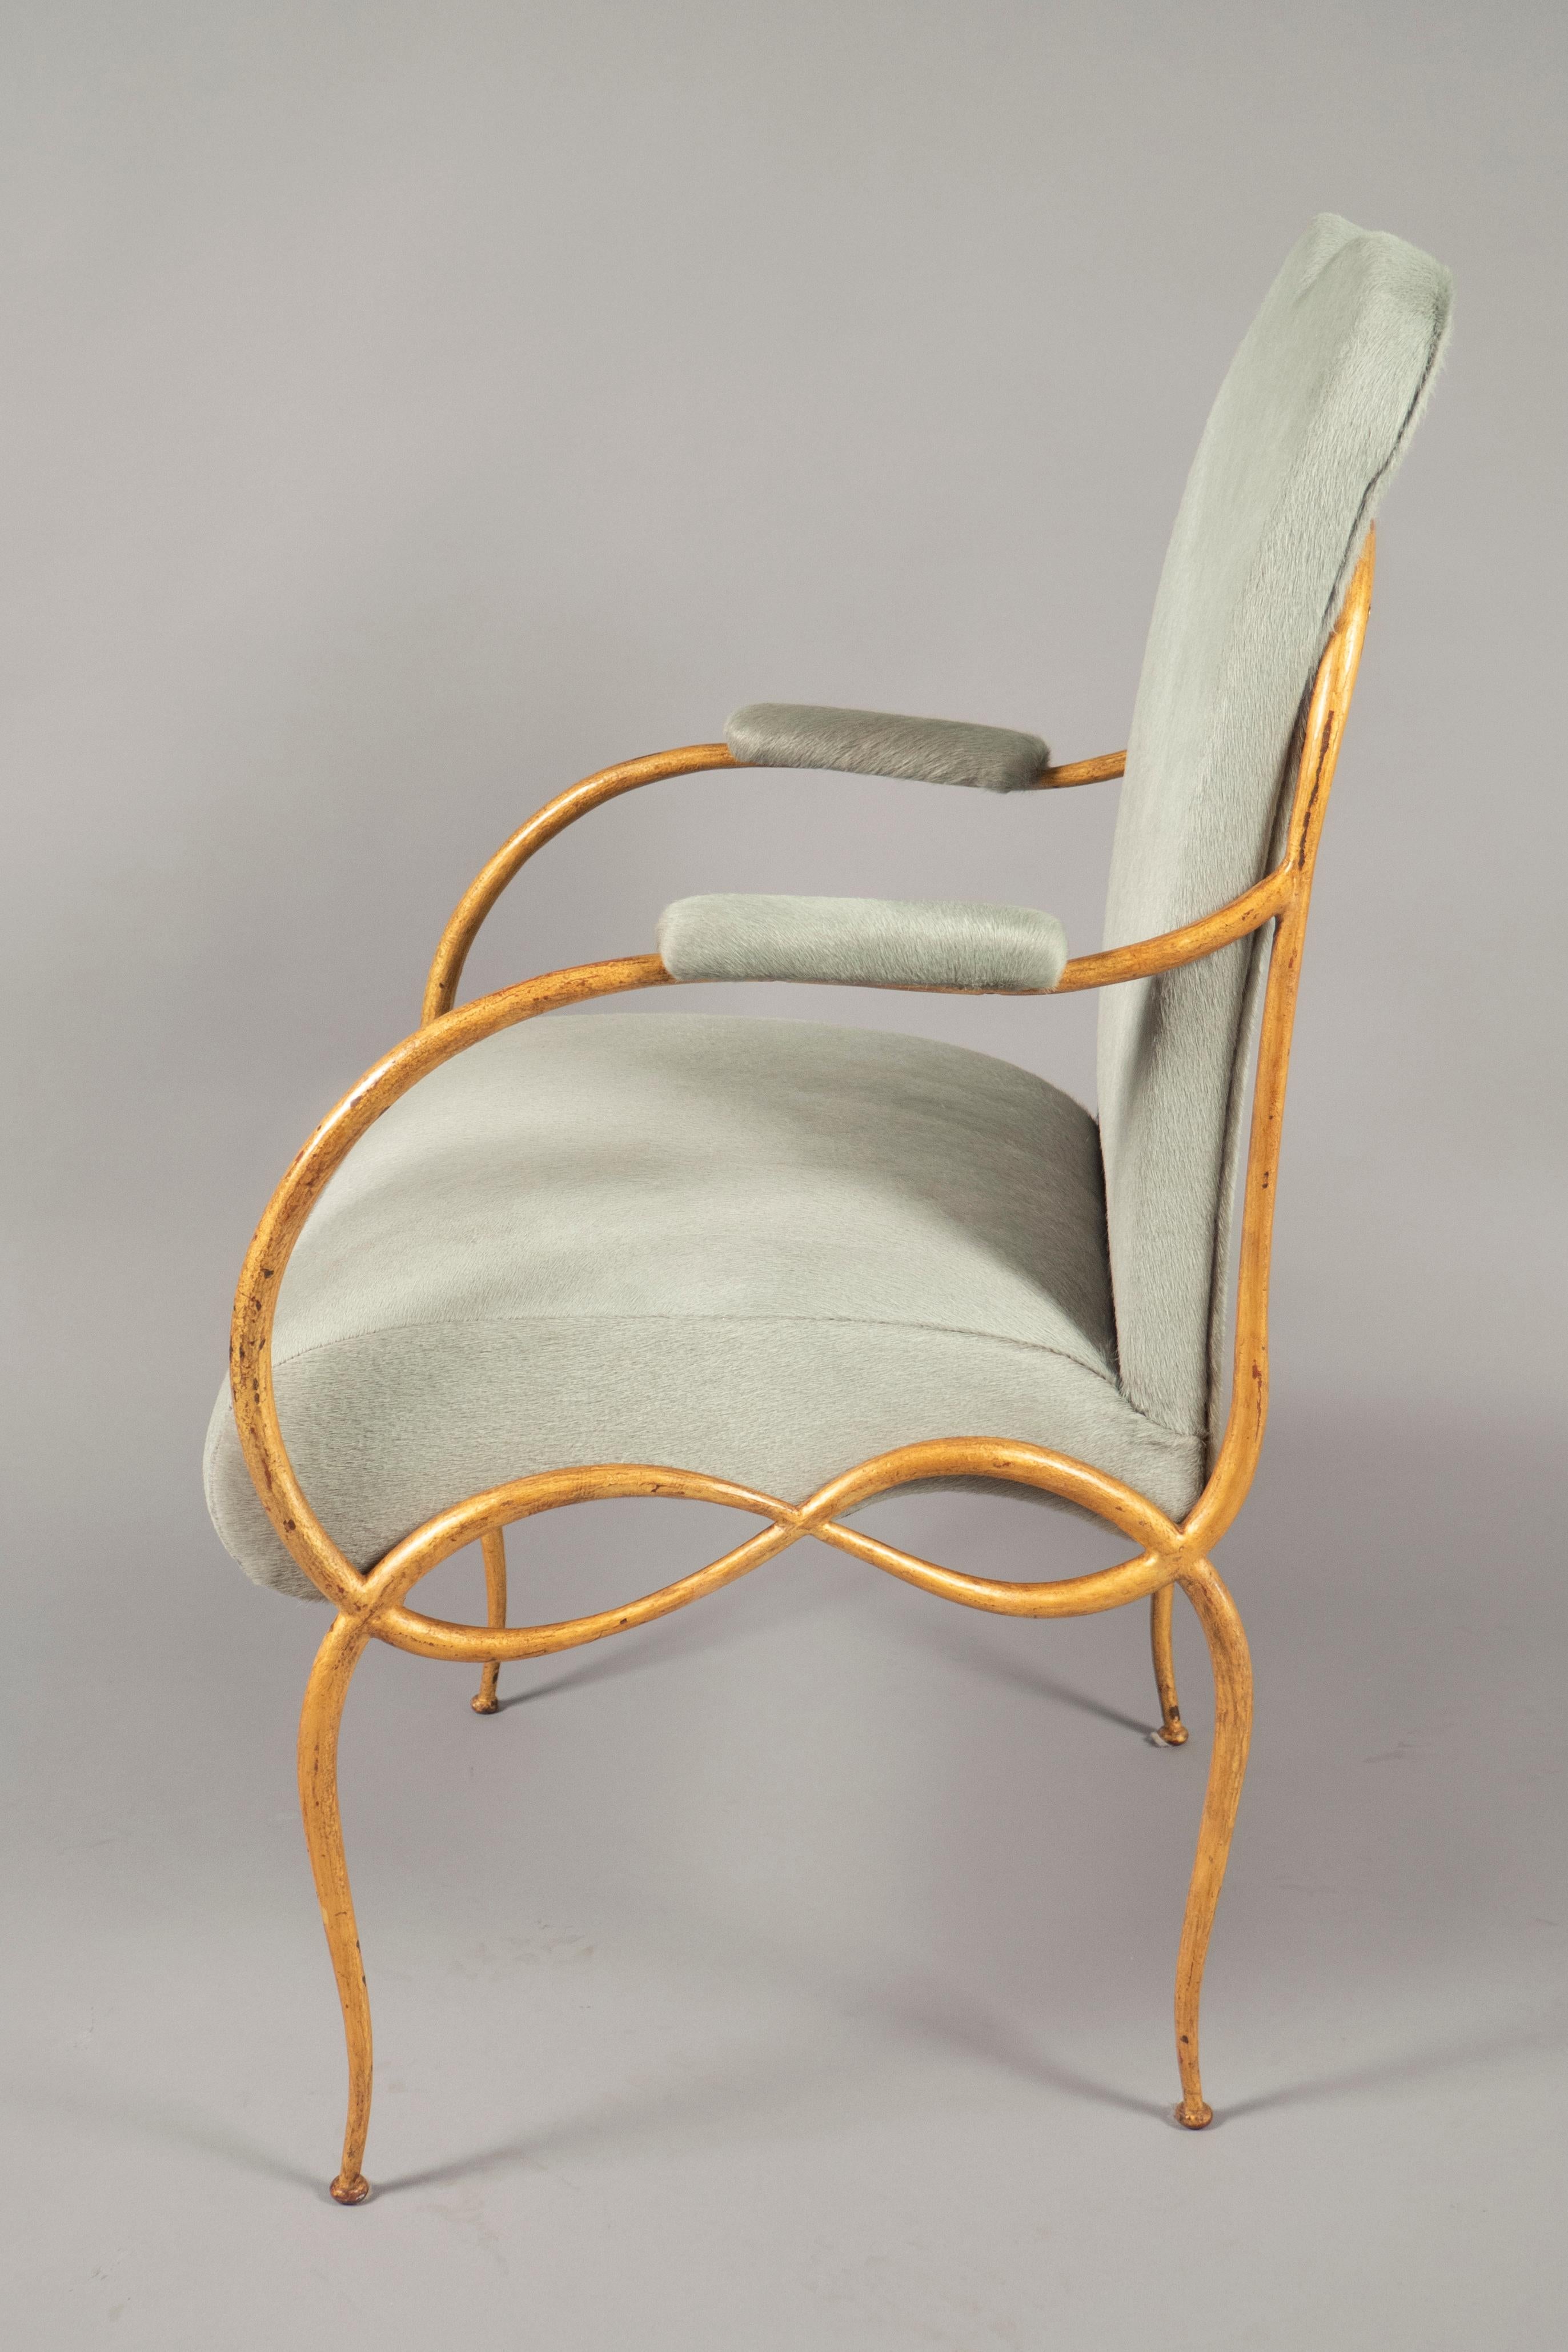 French Set of Six Chairs by Rene Drouet, France, circa 1936